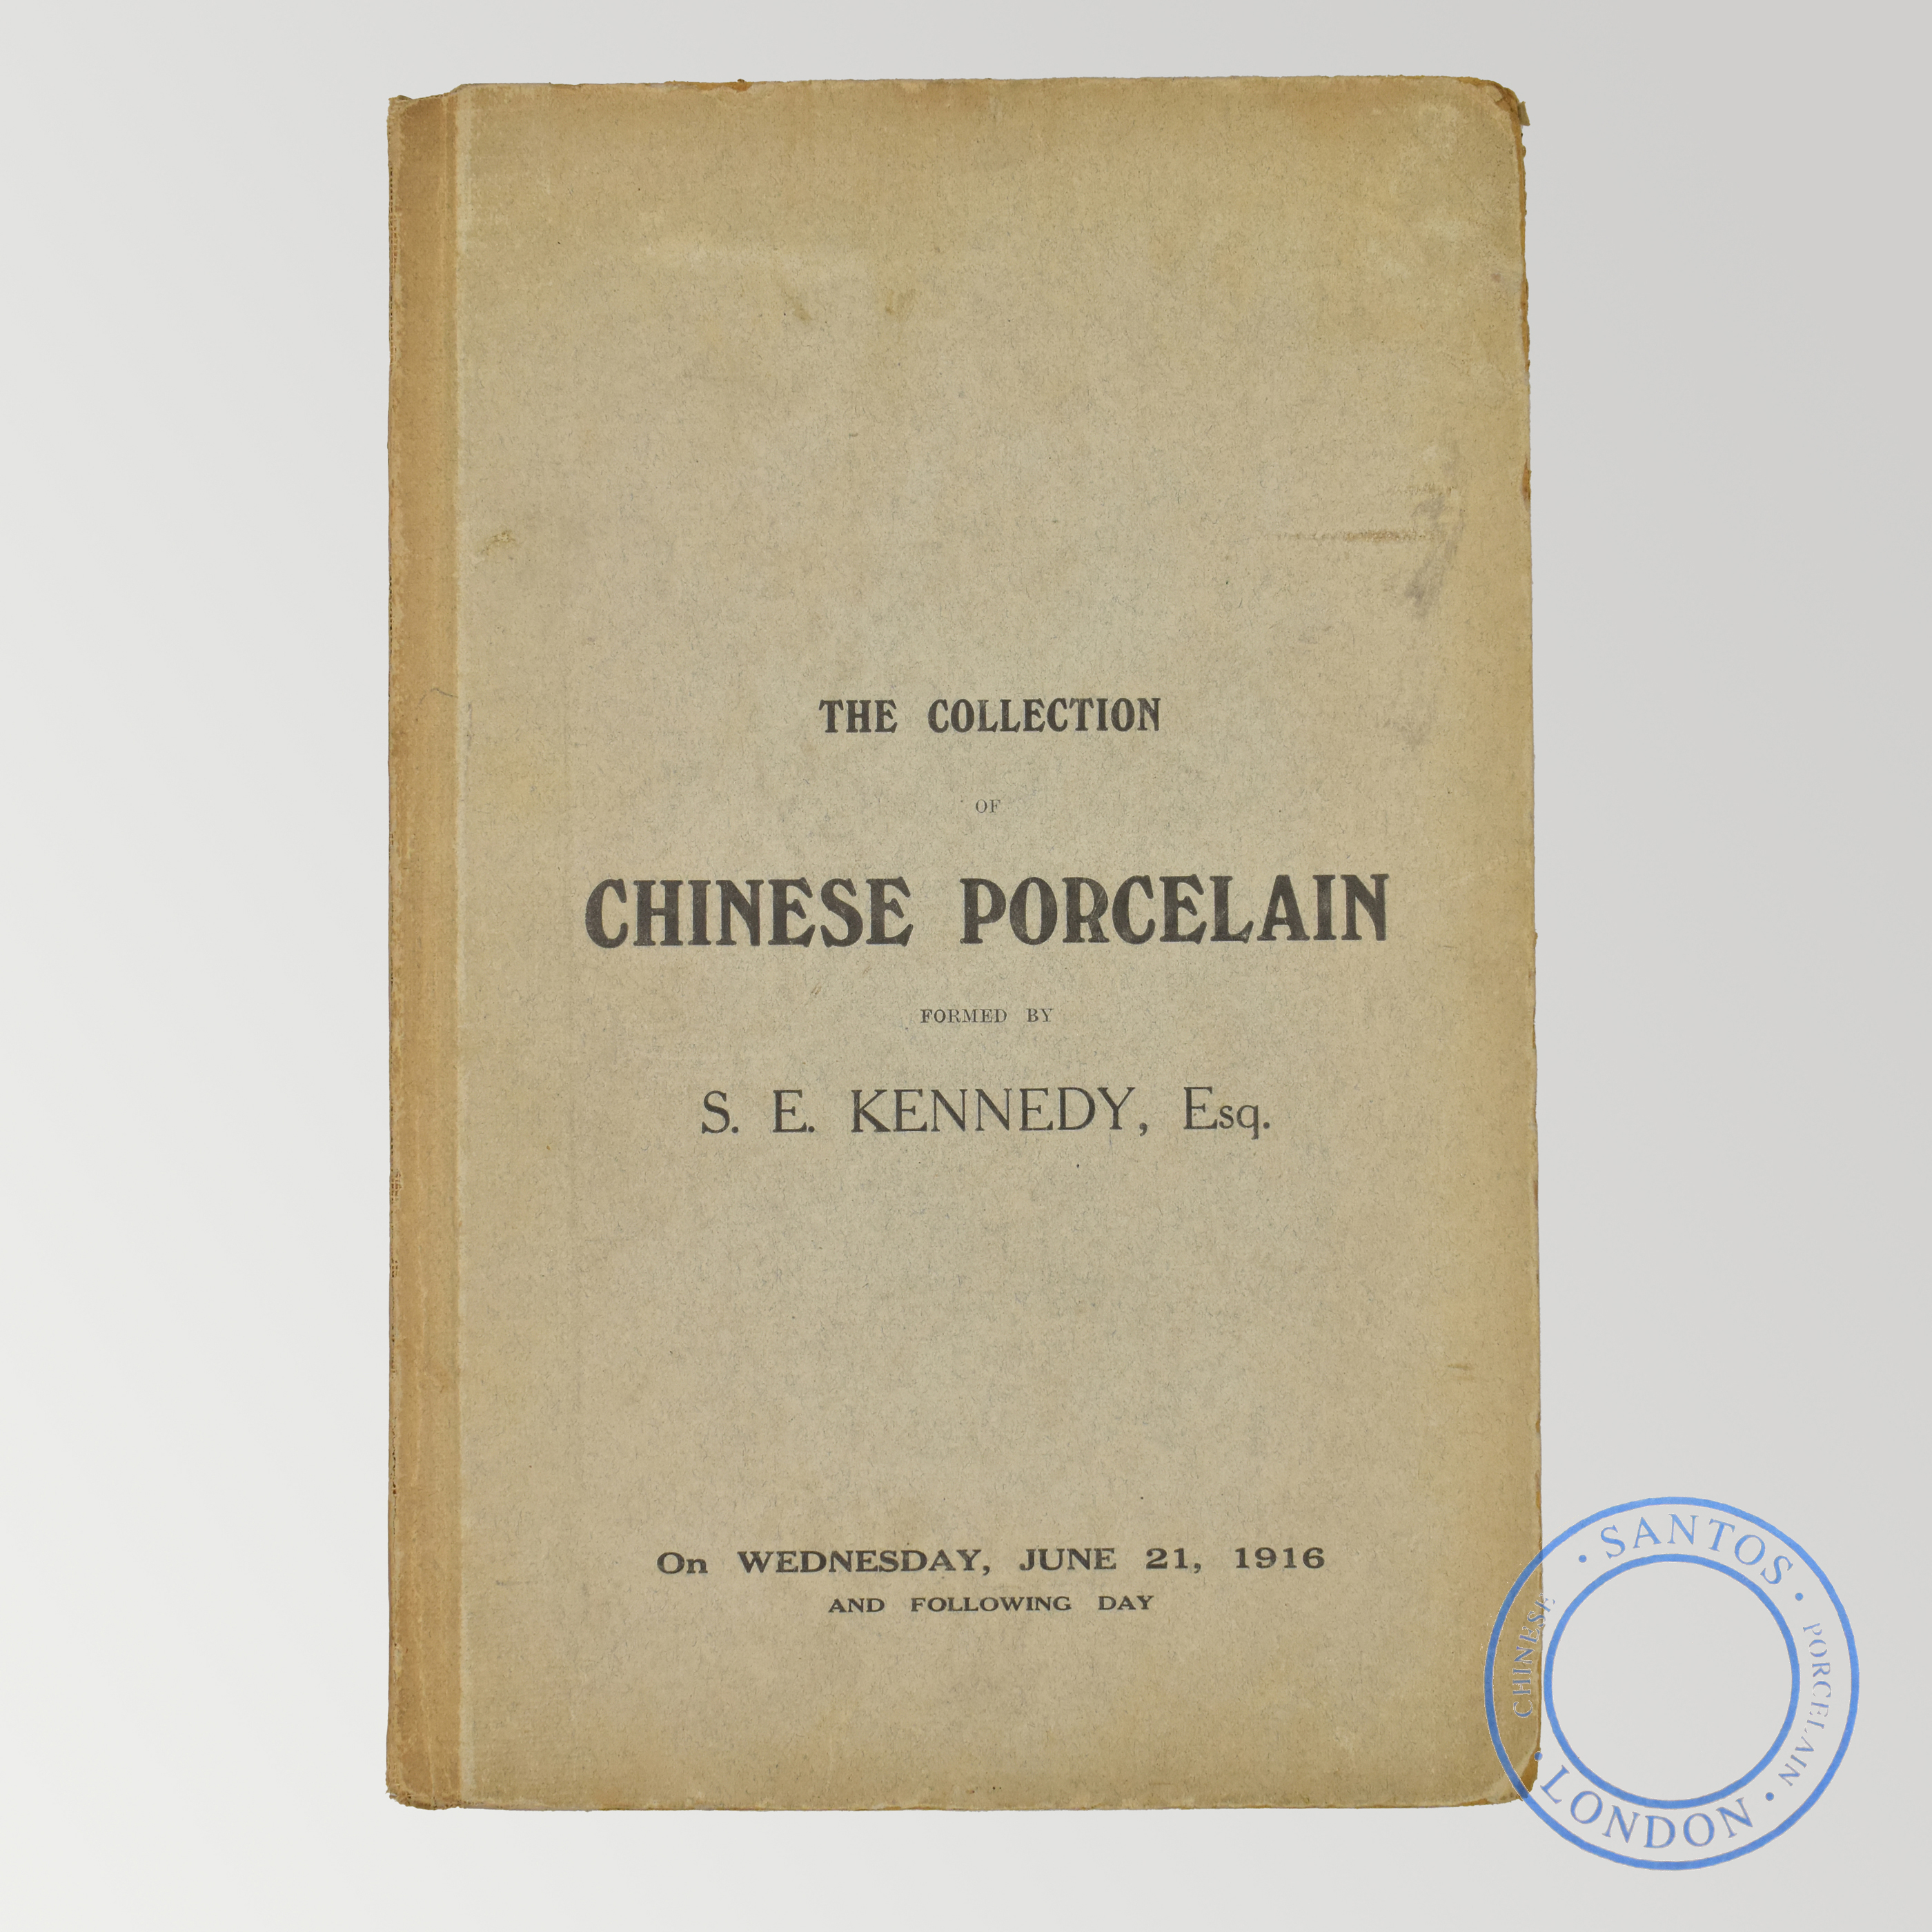 THE COLLECTION OF CHINESE PORCELAIN FORMED BY SIDNEY ERNEST KENNEDY ESQ CHRISTIE’S KING ST JUNE 1916